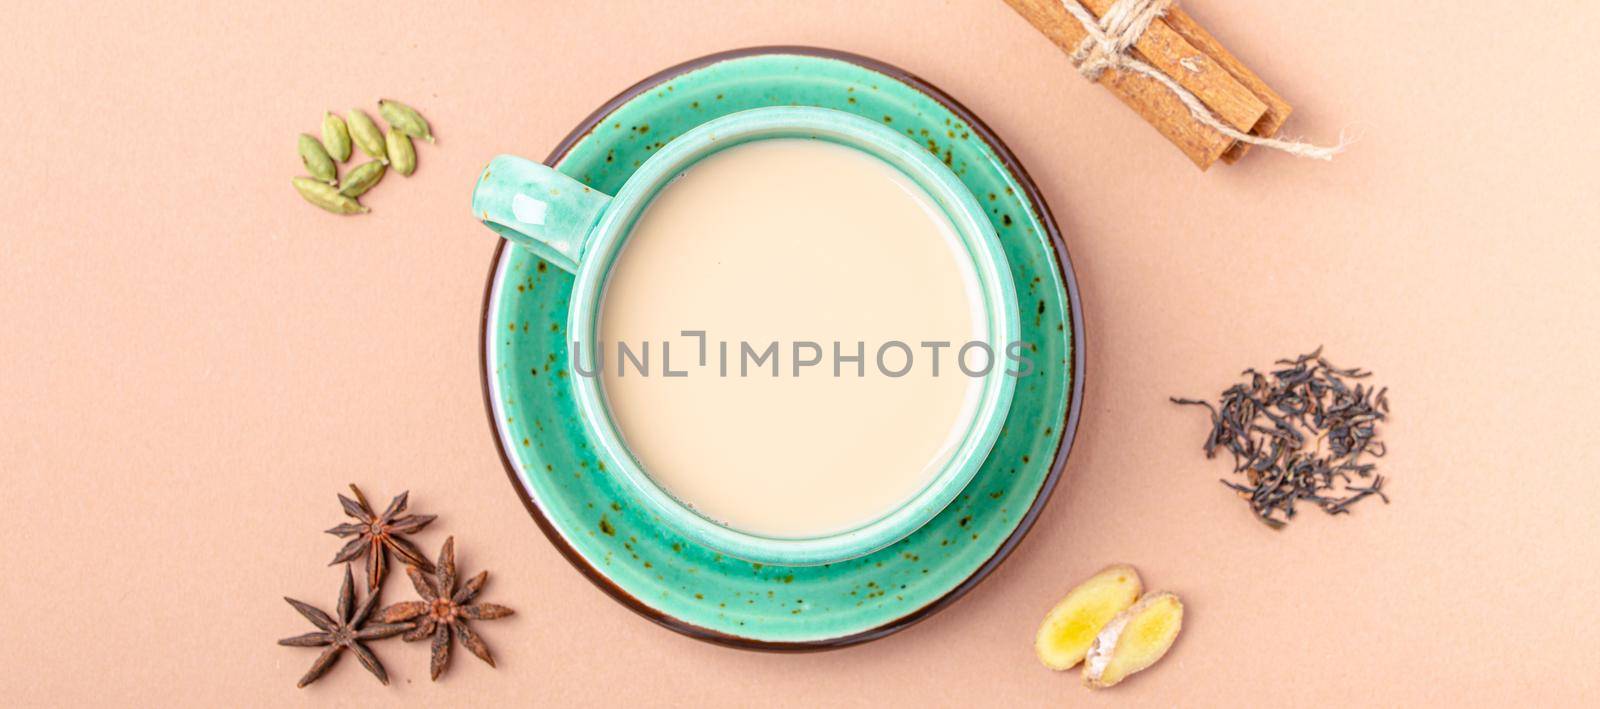 Healthy Indian beverage masala chai - tea hot drink with milk and spices in rustic green teacup with ingredients for making masala chai from above on simple beige minimal background